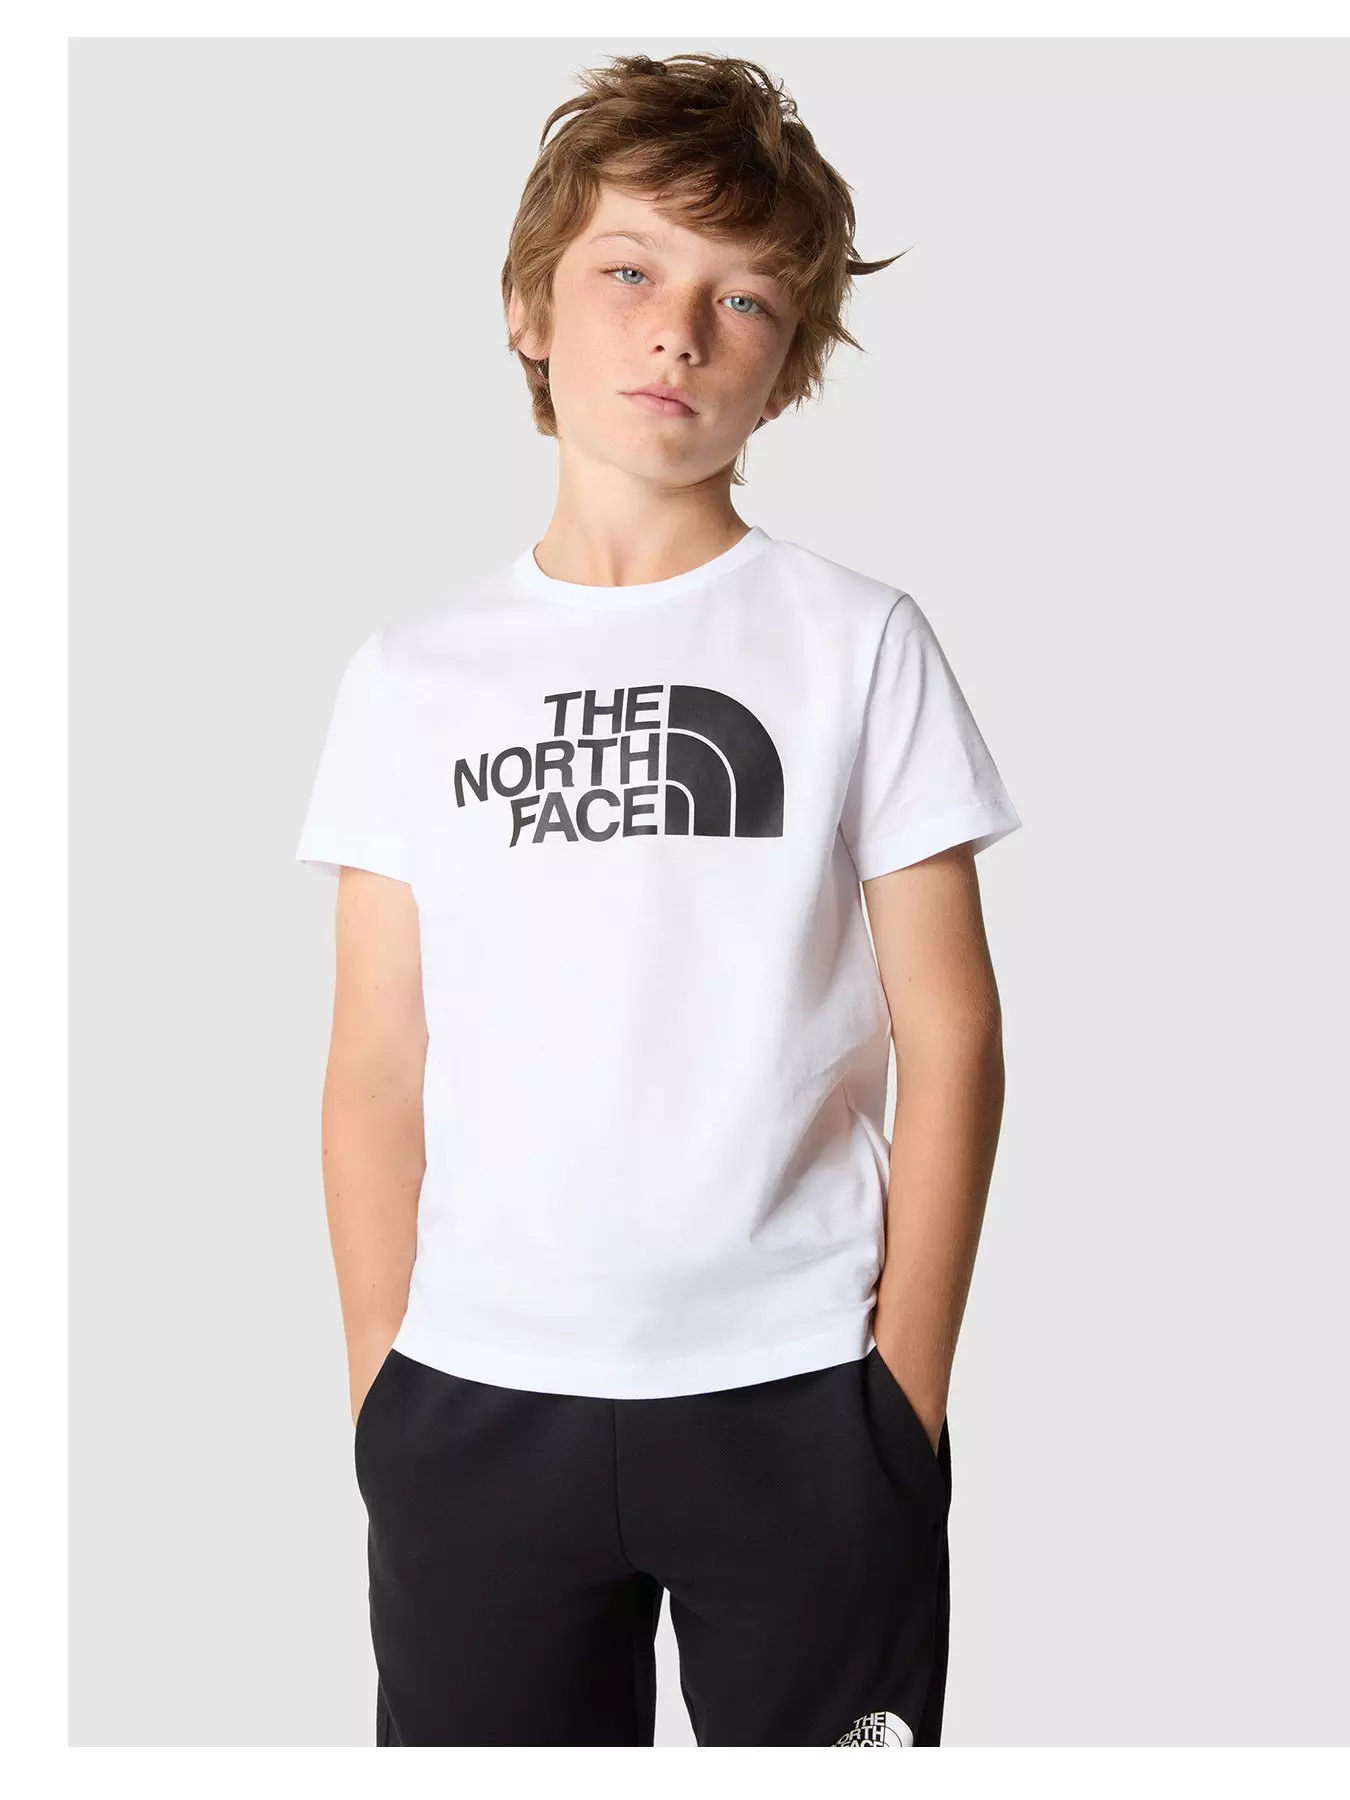 Kids North Face | Face infant North